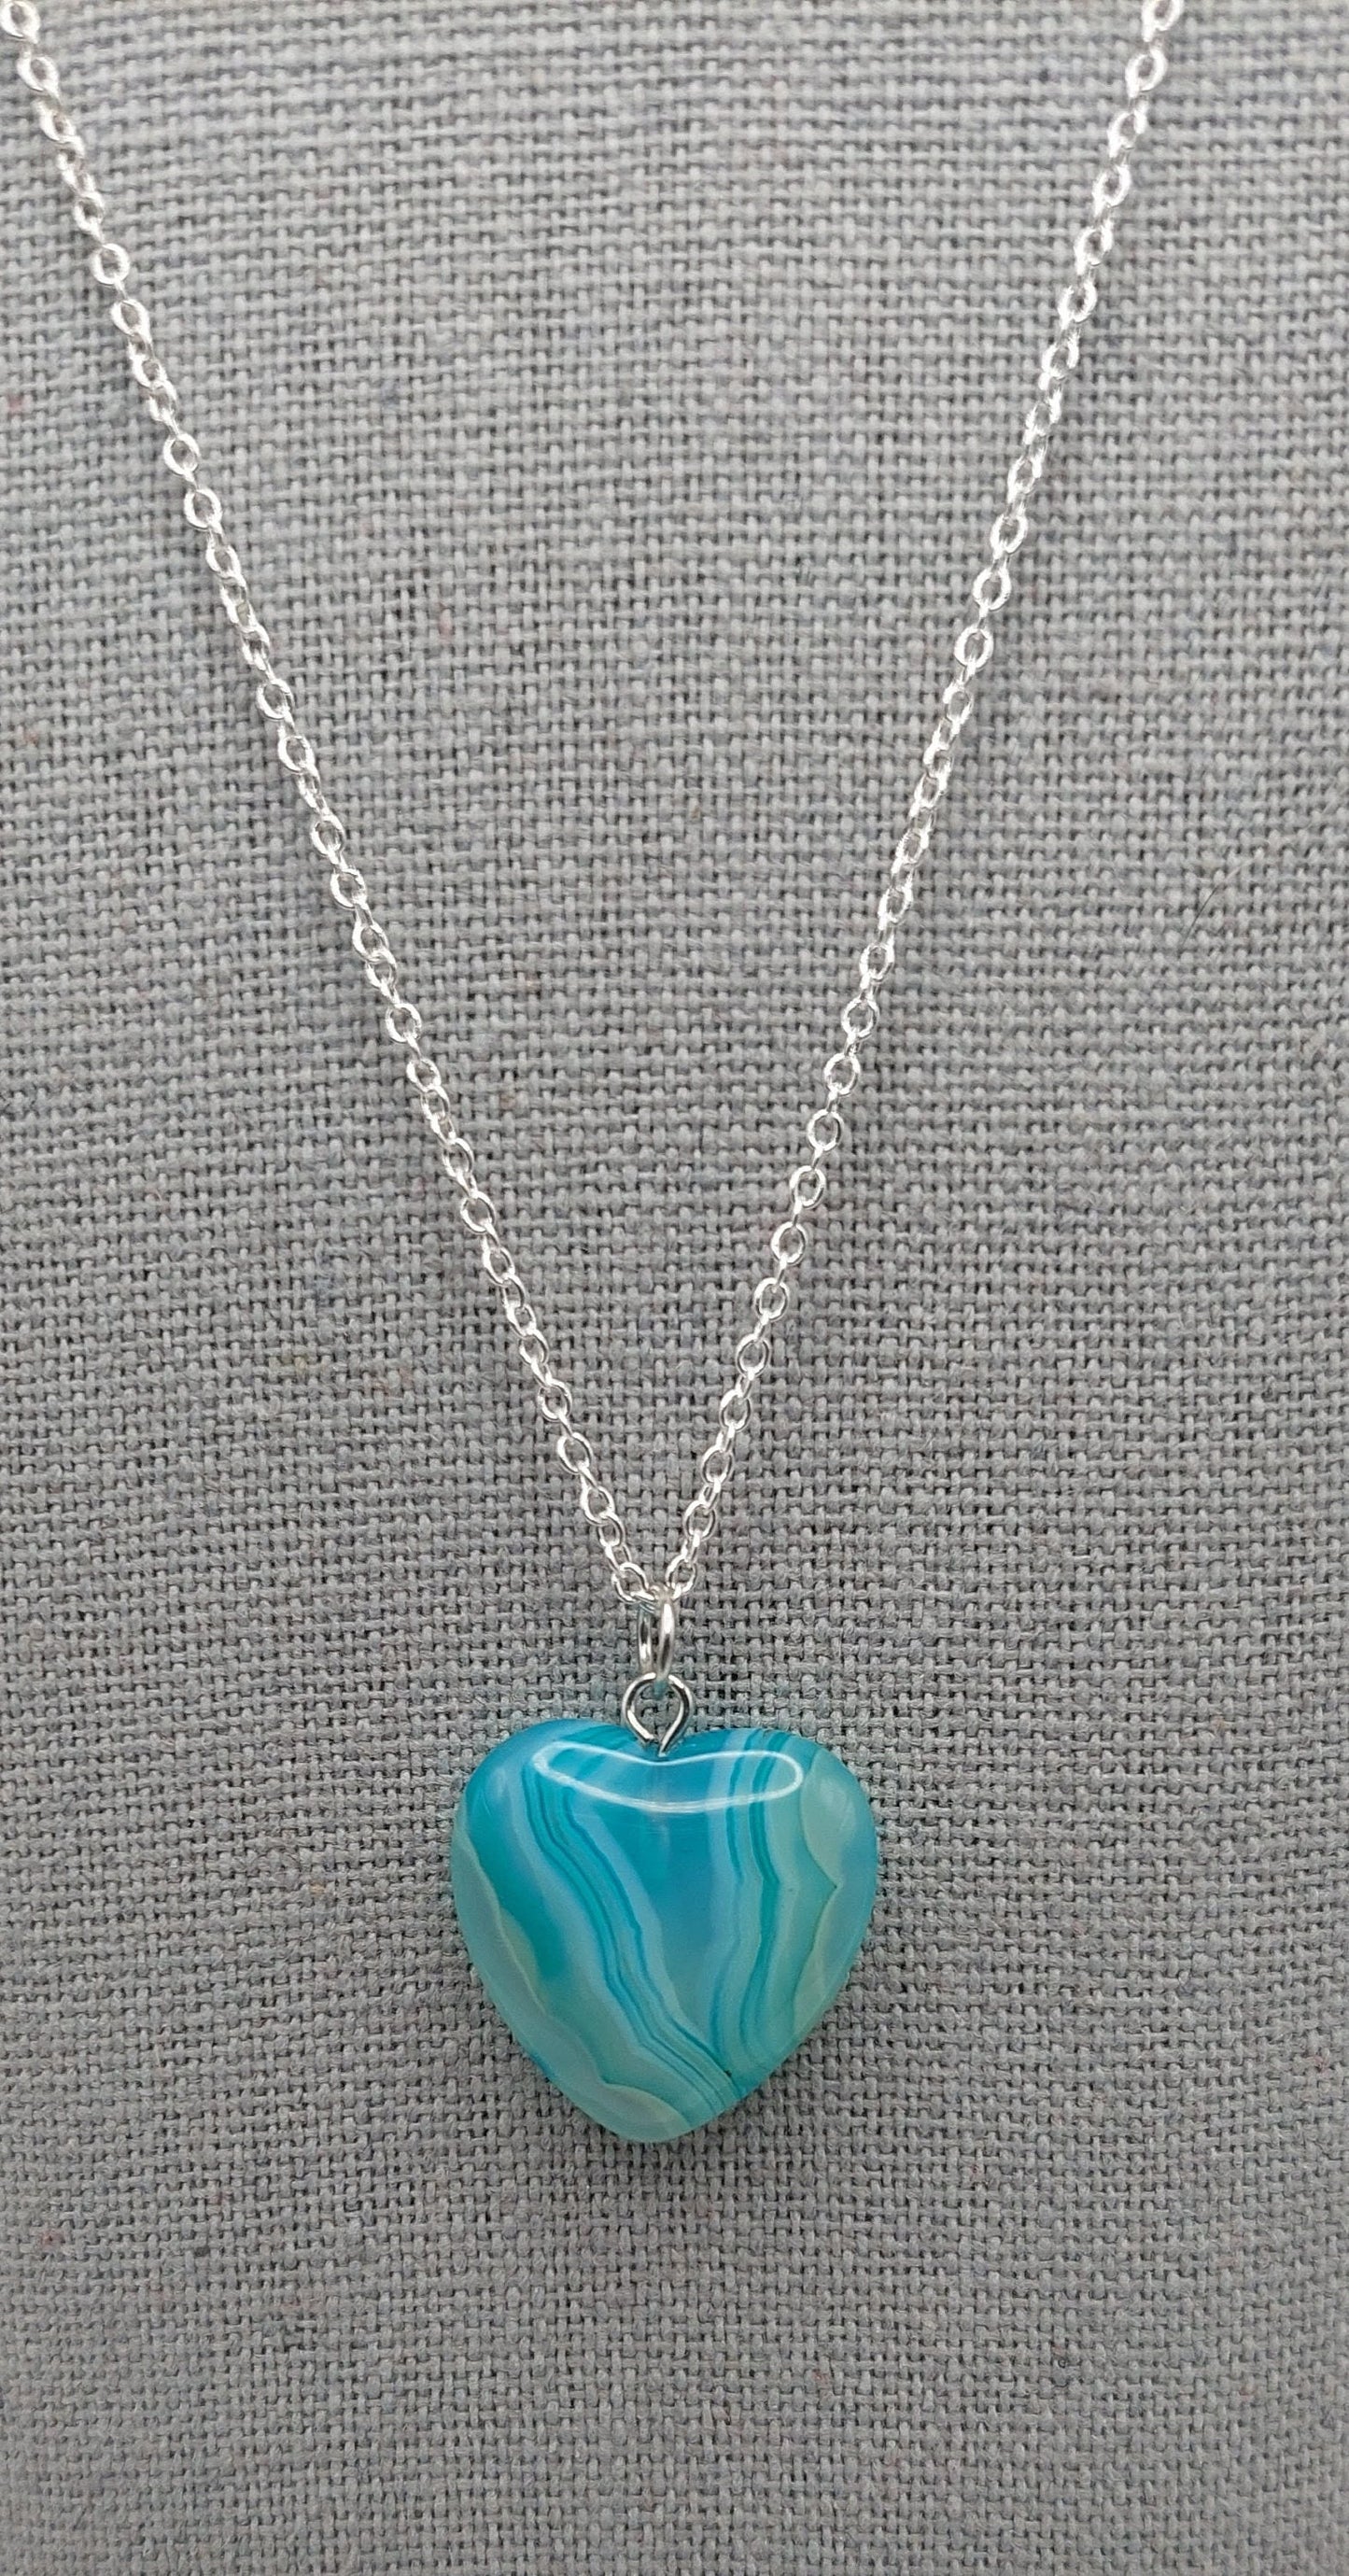 Blue and White Onyx Agate Heart Pendant Necklace